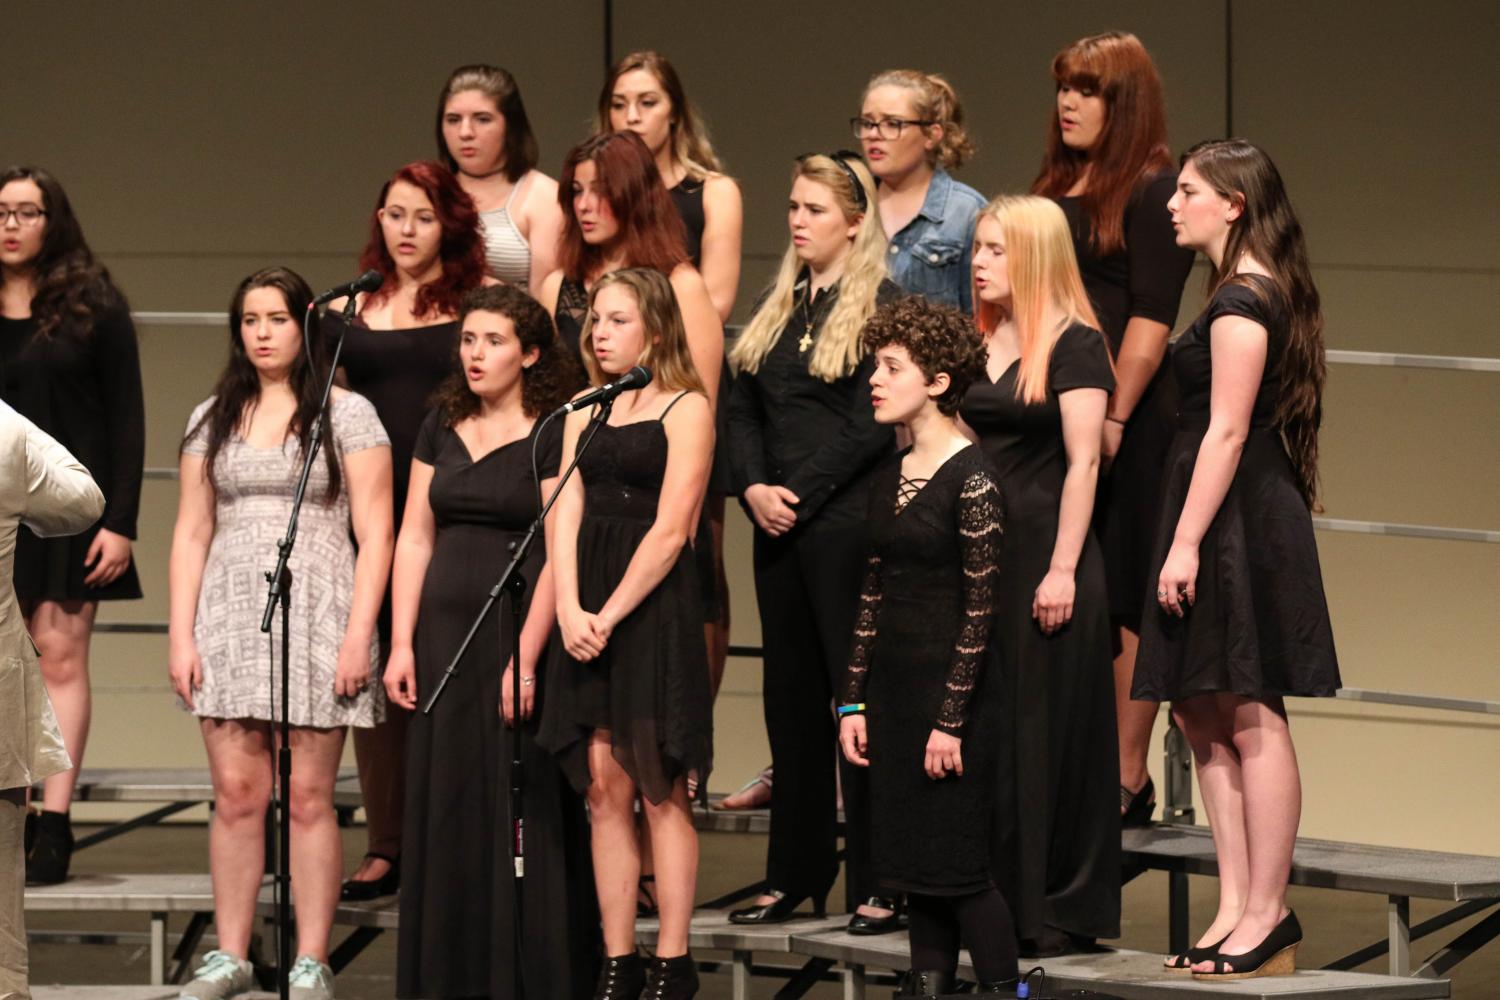 Members of the all combined Chamber and Accents Choir group give an elegant performance of when it was yet dark at their final concert of the year.